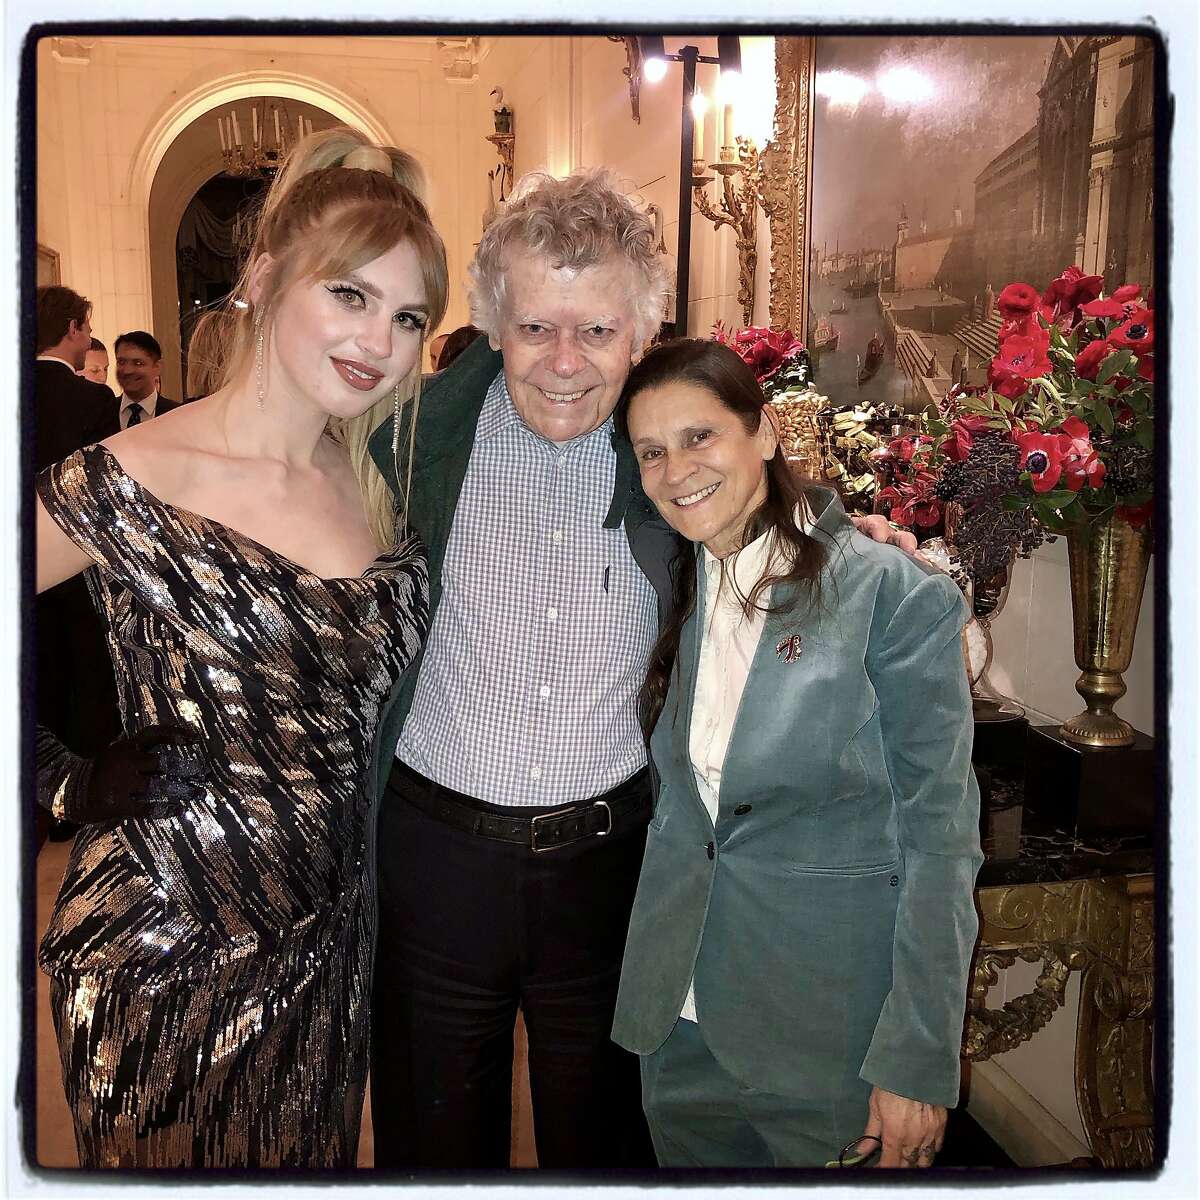 Ivy Getty (left) with her grandfather, Gordon Getty, and cousin, Aileen Getty, at the amfAR Charity Poker. Nov. 15, 2019.